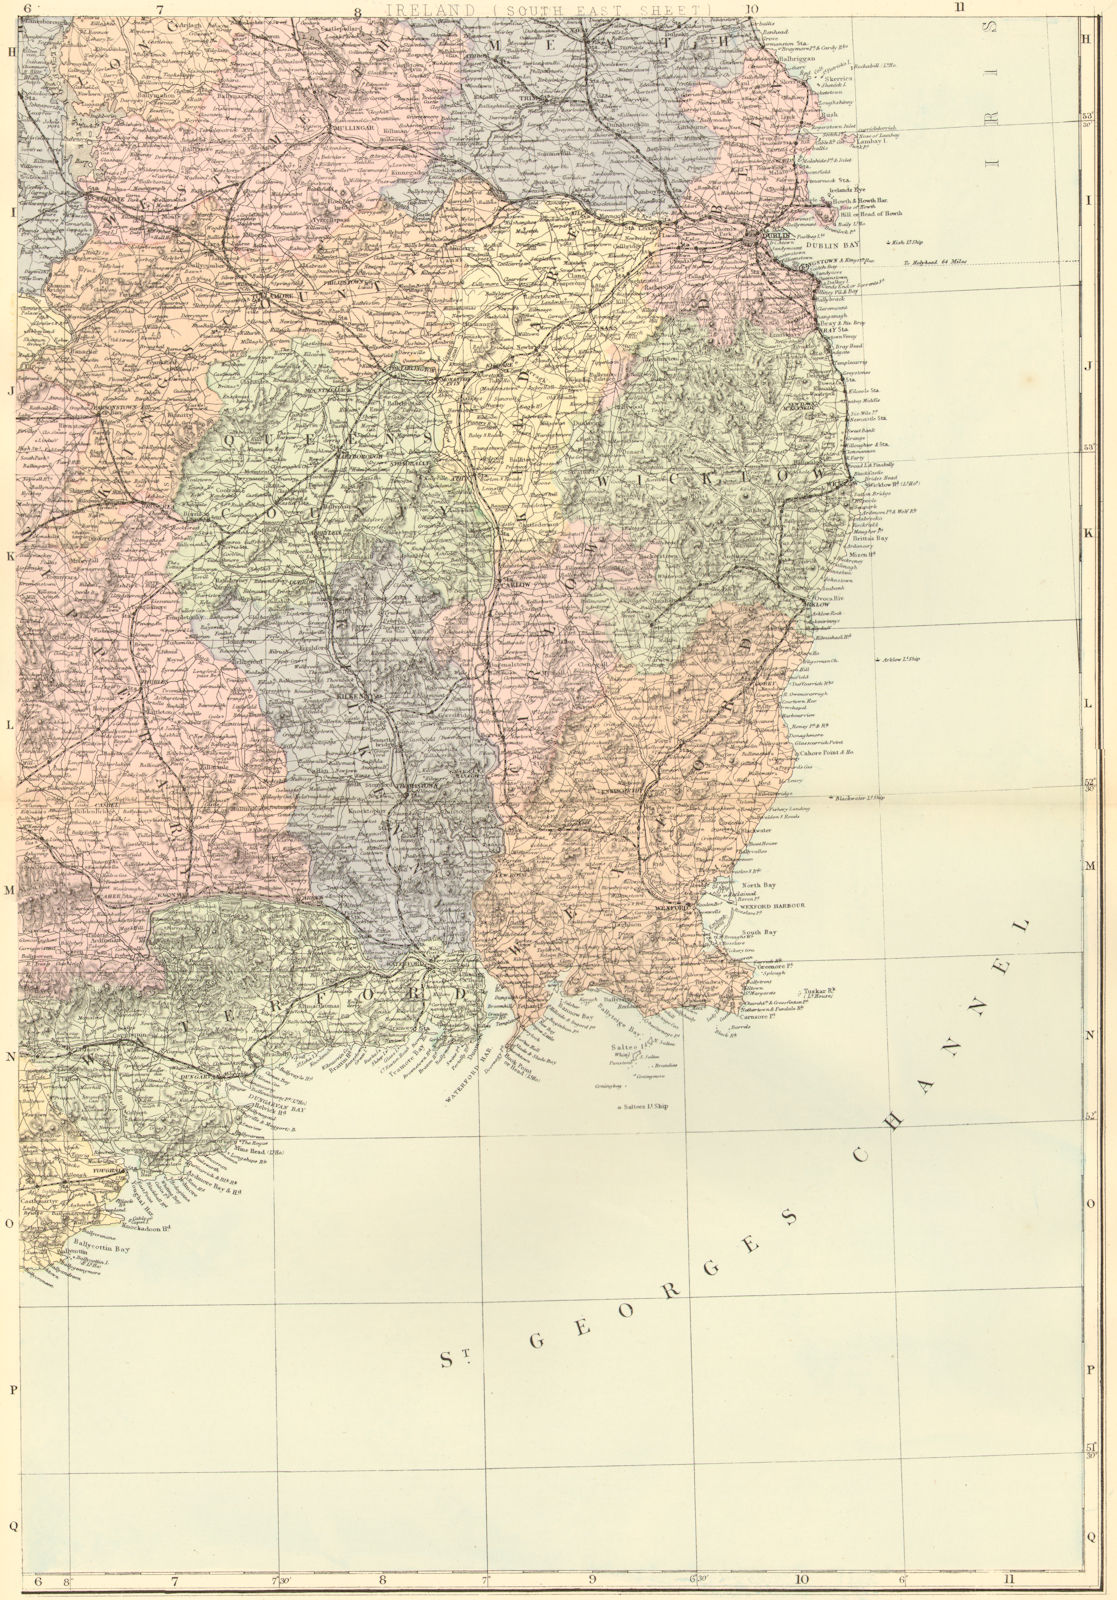 Associate Product IRELAND (South East). Leinster. Dublin Wicklow Wexford. GW BACON 1884 old map